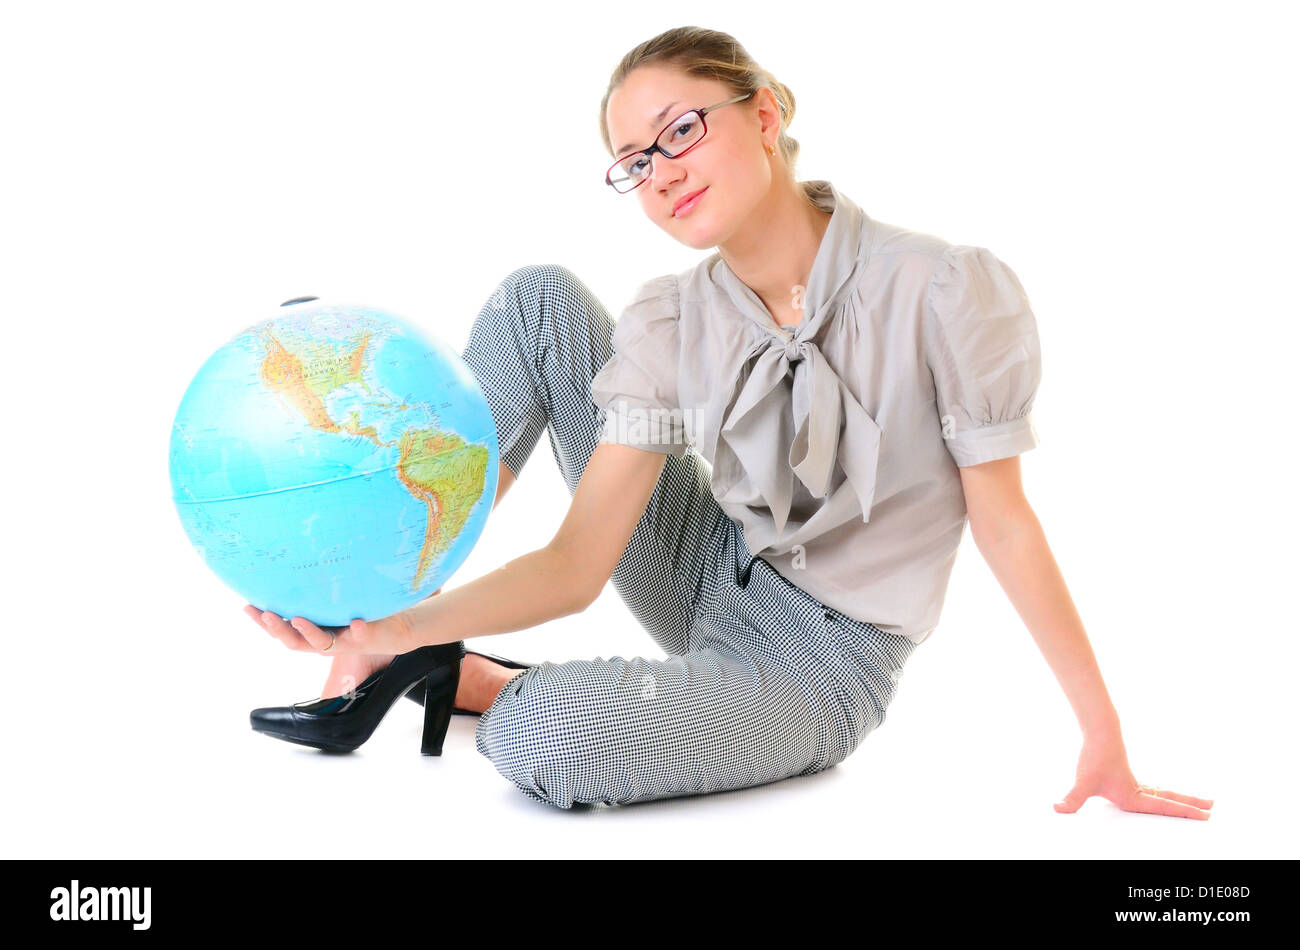 Globe in beauty hands of sitting young woman Stock Photo